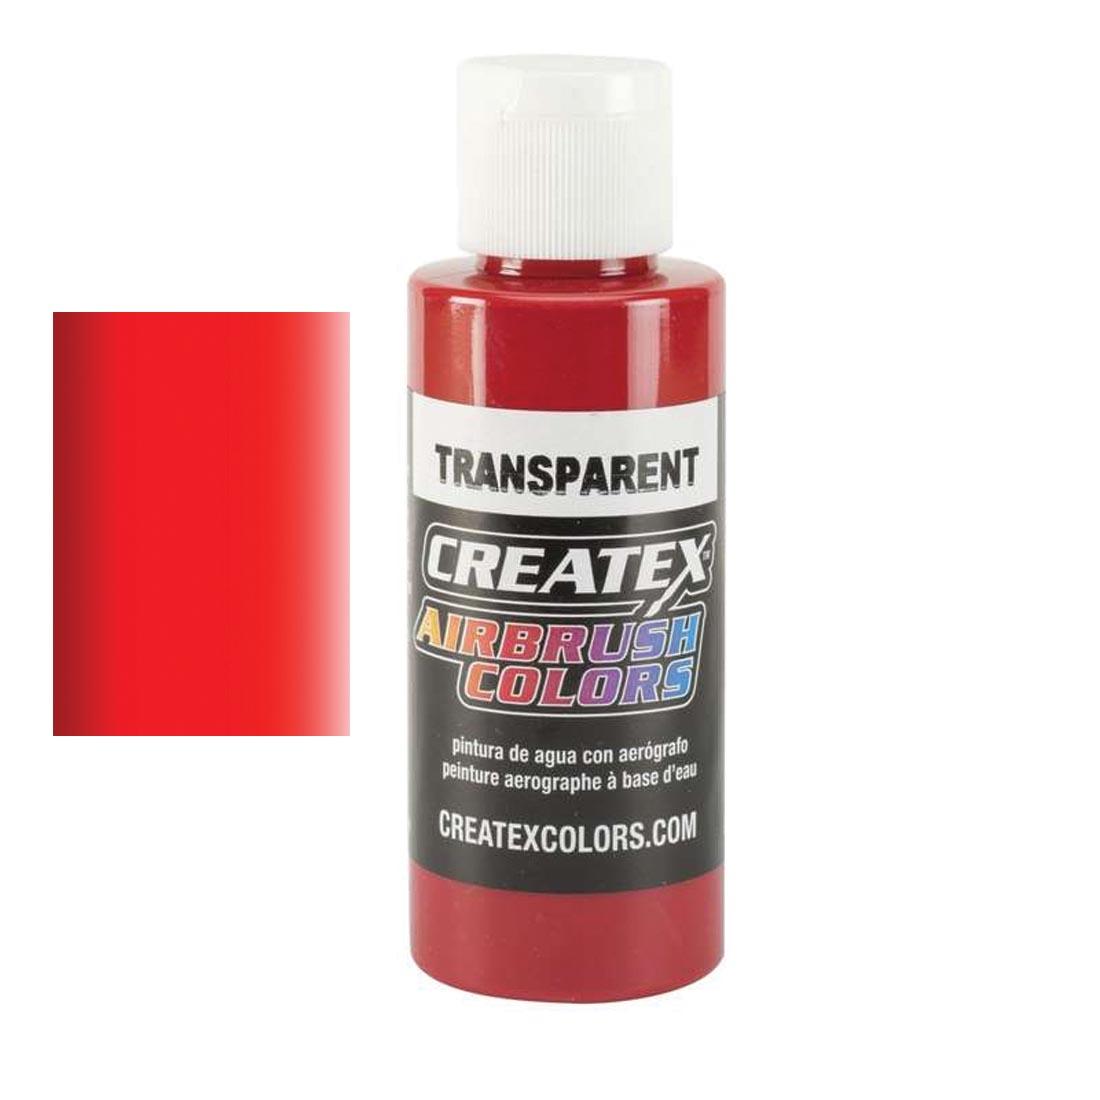 Bottle of Createx Airbrush Color Beside Transparent Brite Red Color Swatch